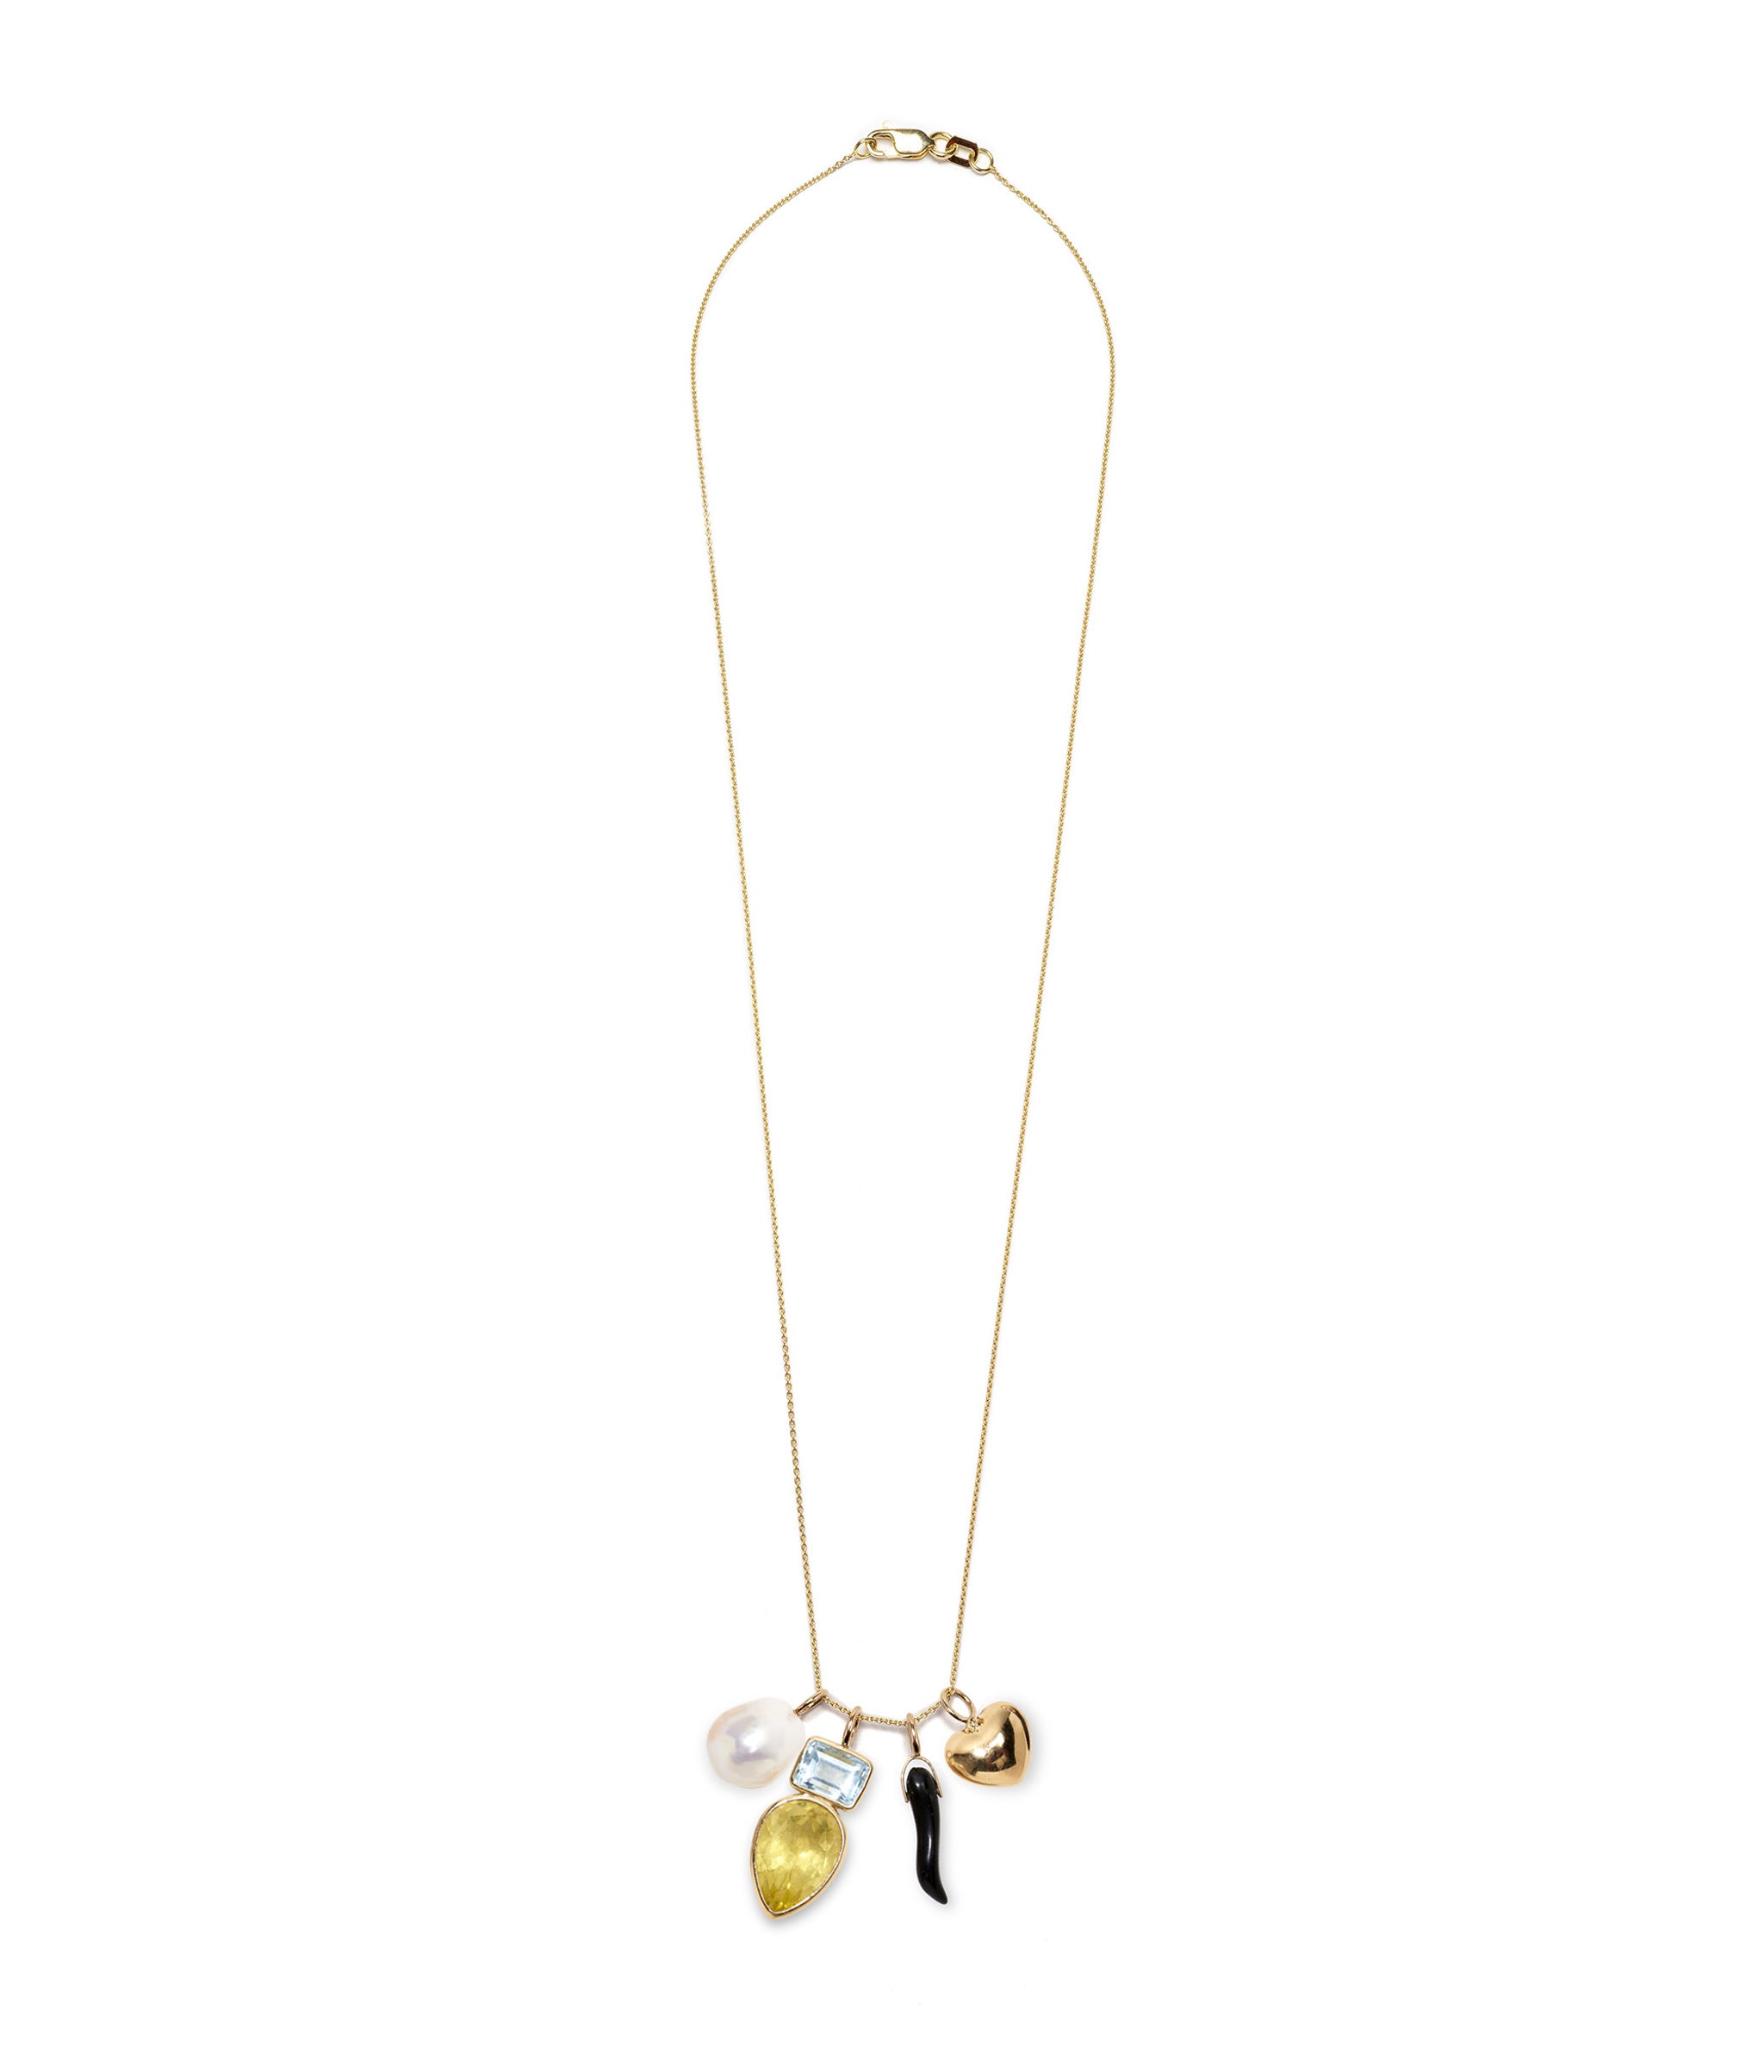 Dainty gold necklace chain with assorted charms